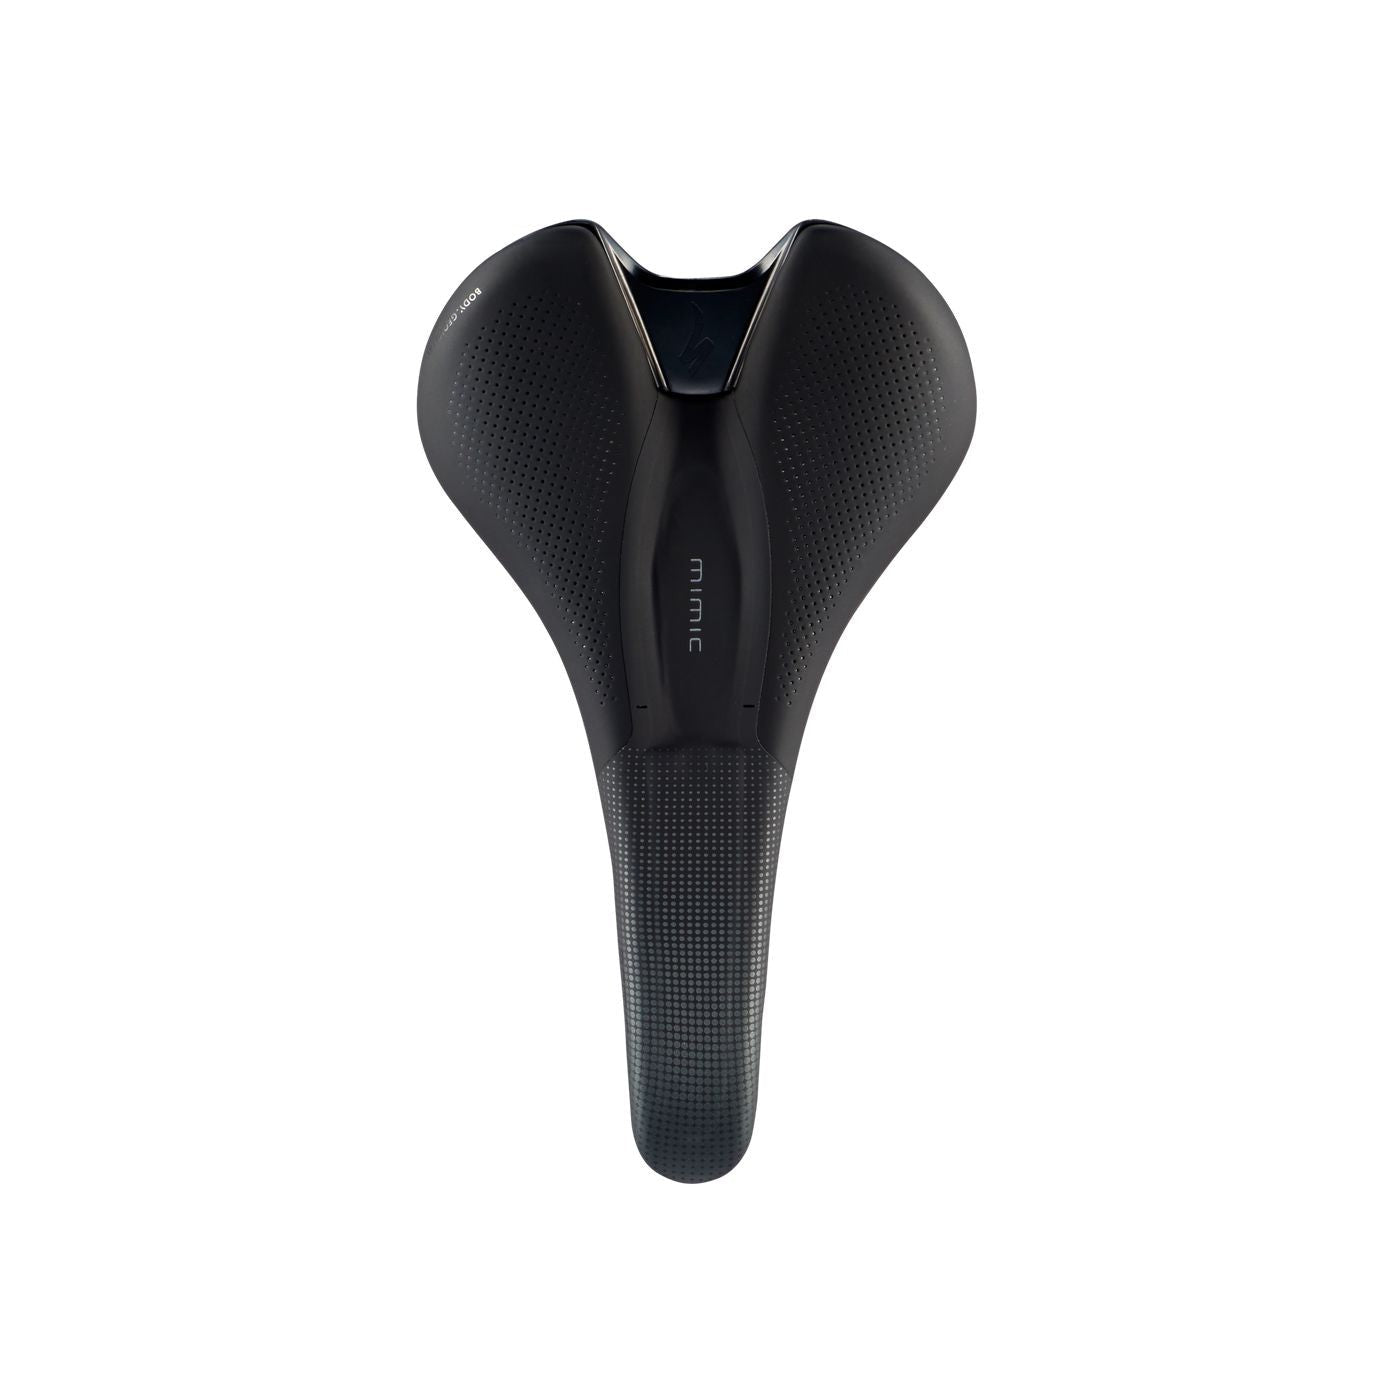 Specialized Romin EVO Comp with MIMIC Women's Bike Saddle - Saddles - Bicycle Warehouse